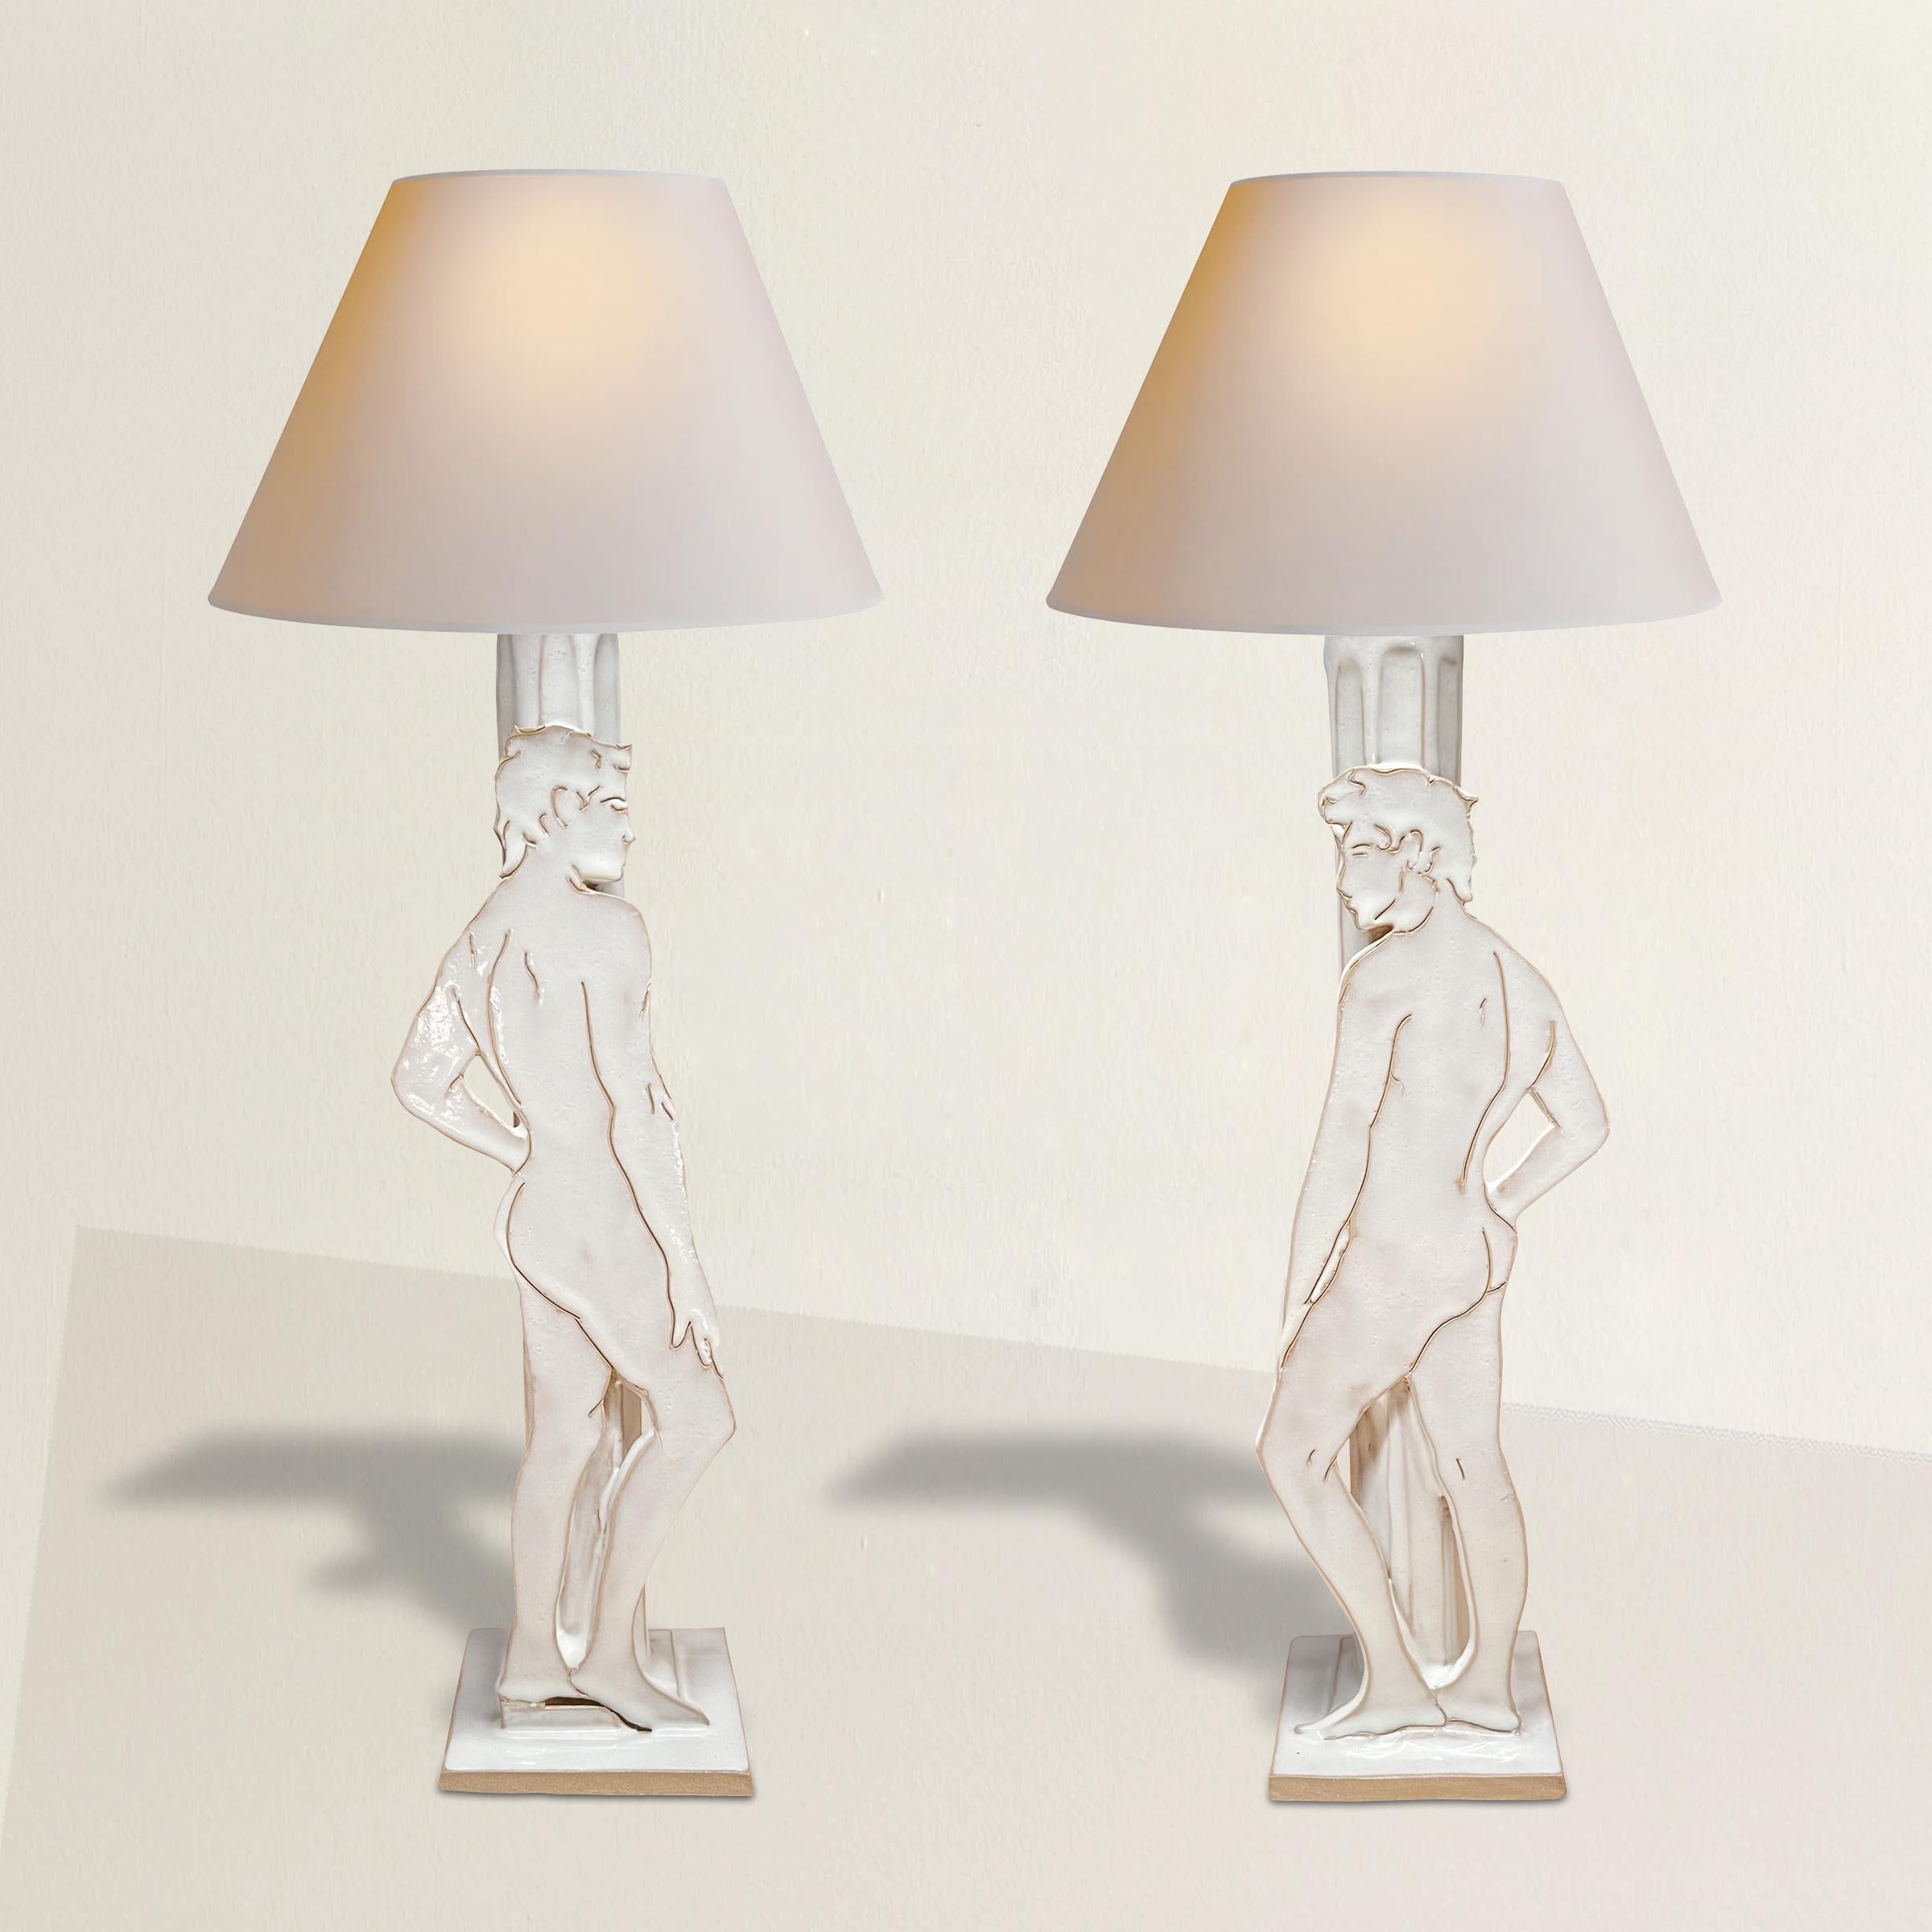 A stunning and chic pair of 21st century Brazilian artist-made glazed hand-built ceramic table lamps each with a unique hand-drawn male nude figure in contrapposto and leaning against a fluted column. Wired for US with white paper shades.